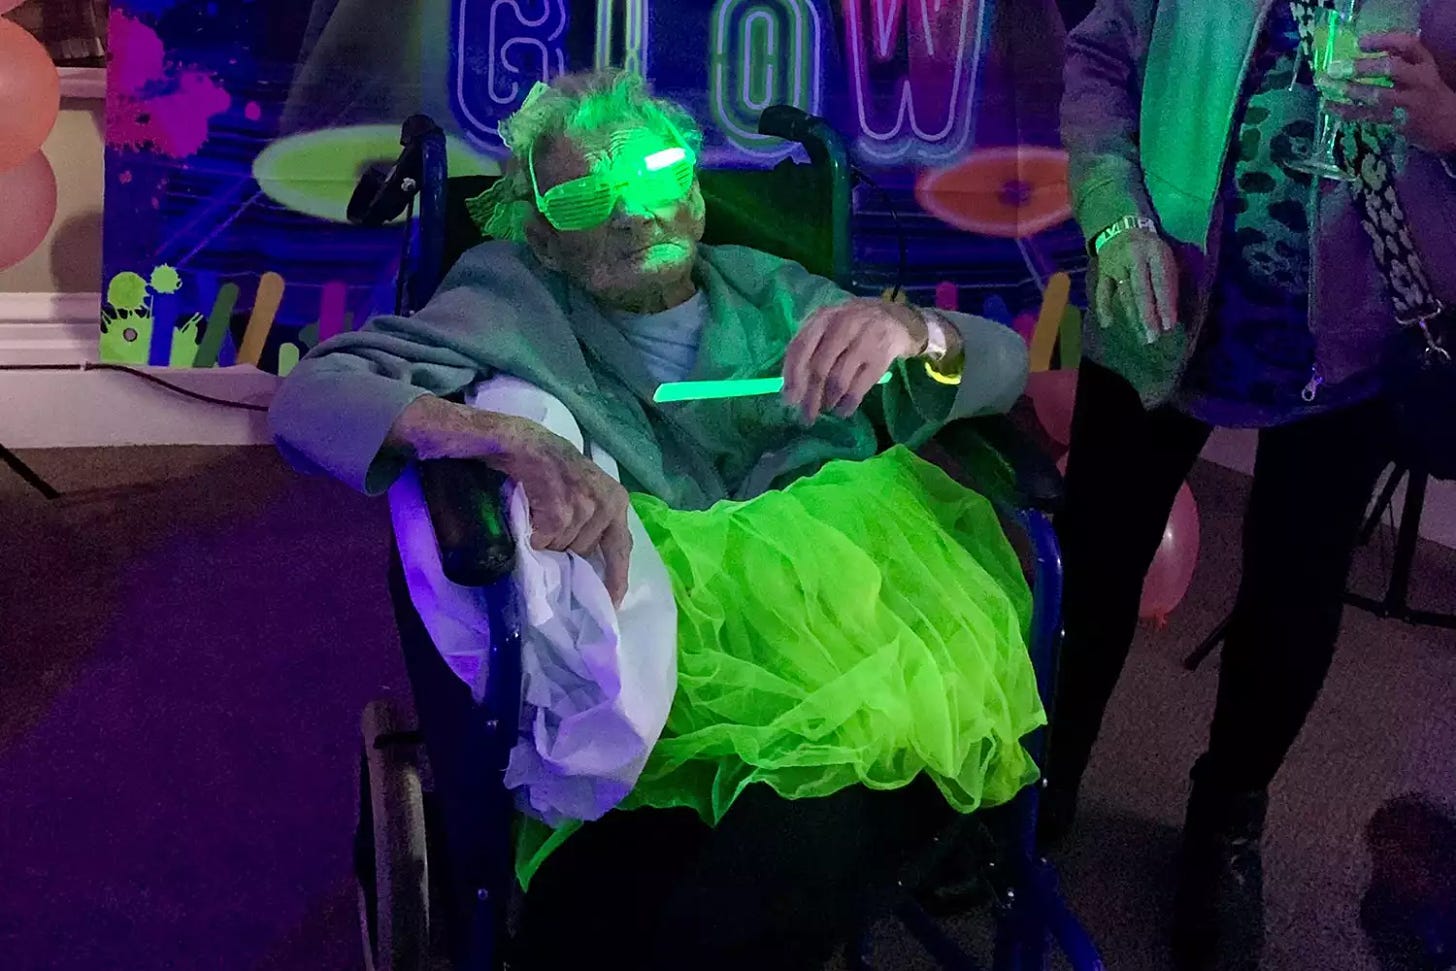 Vera Sak, who turned 103, celebrated her milestone birthday by wearing neon green glasses and rave-inspired garments to her party a Chestnuts Residential Home in Grimsby.